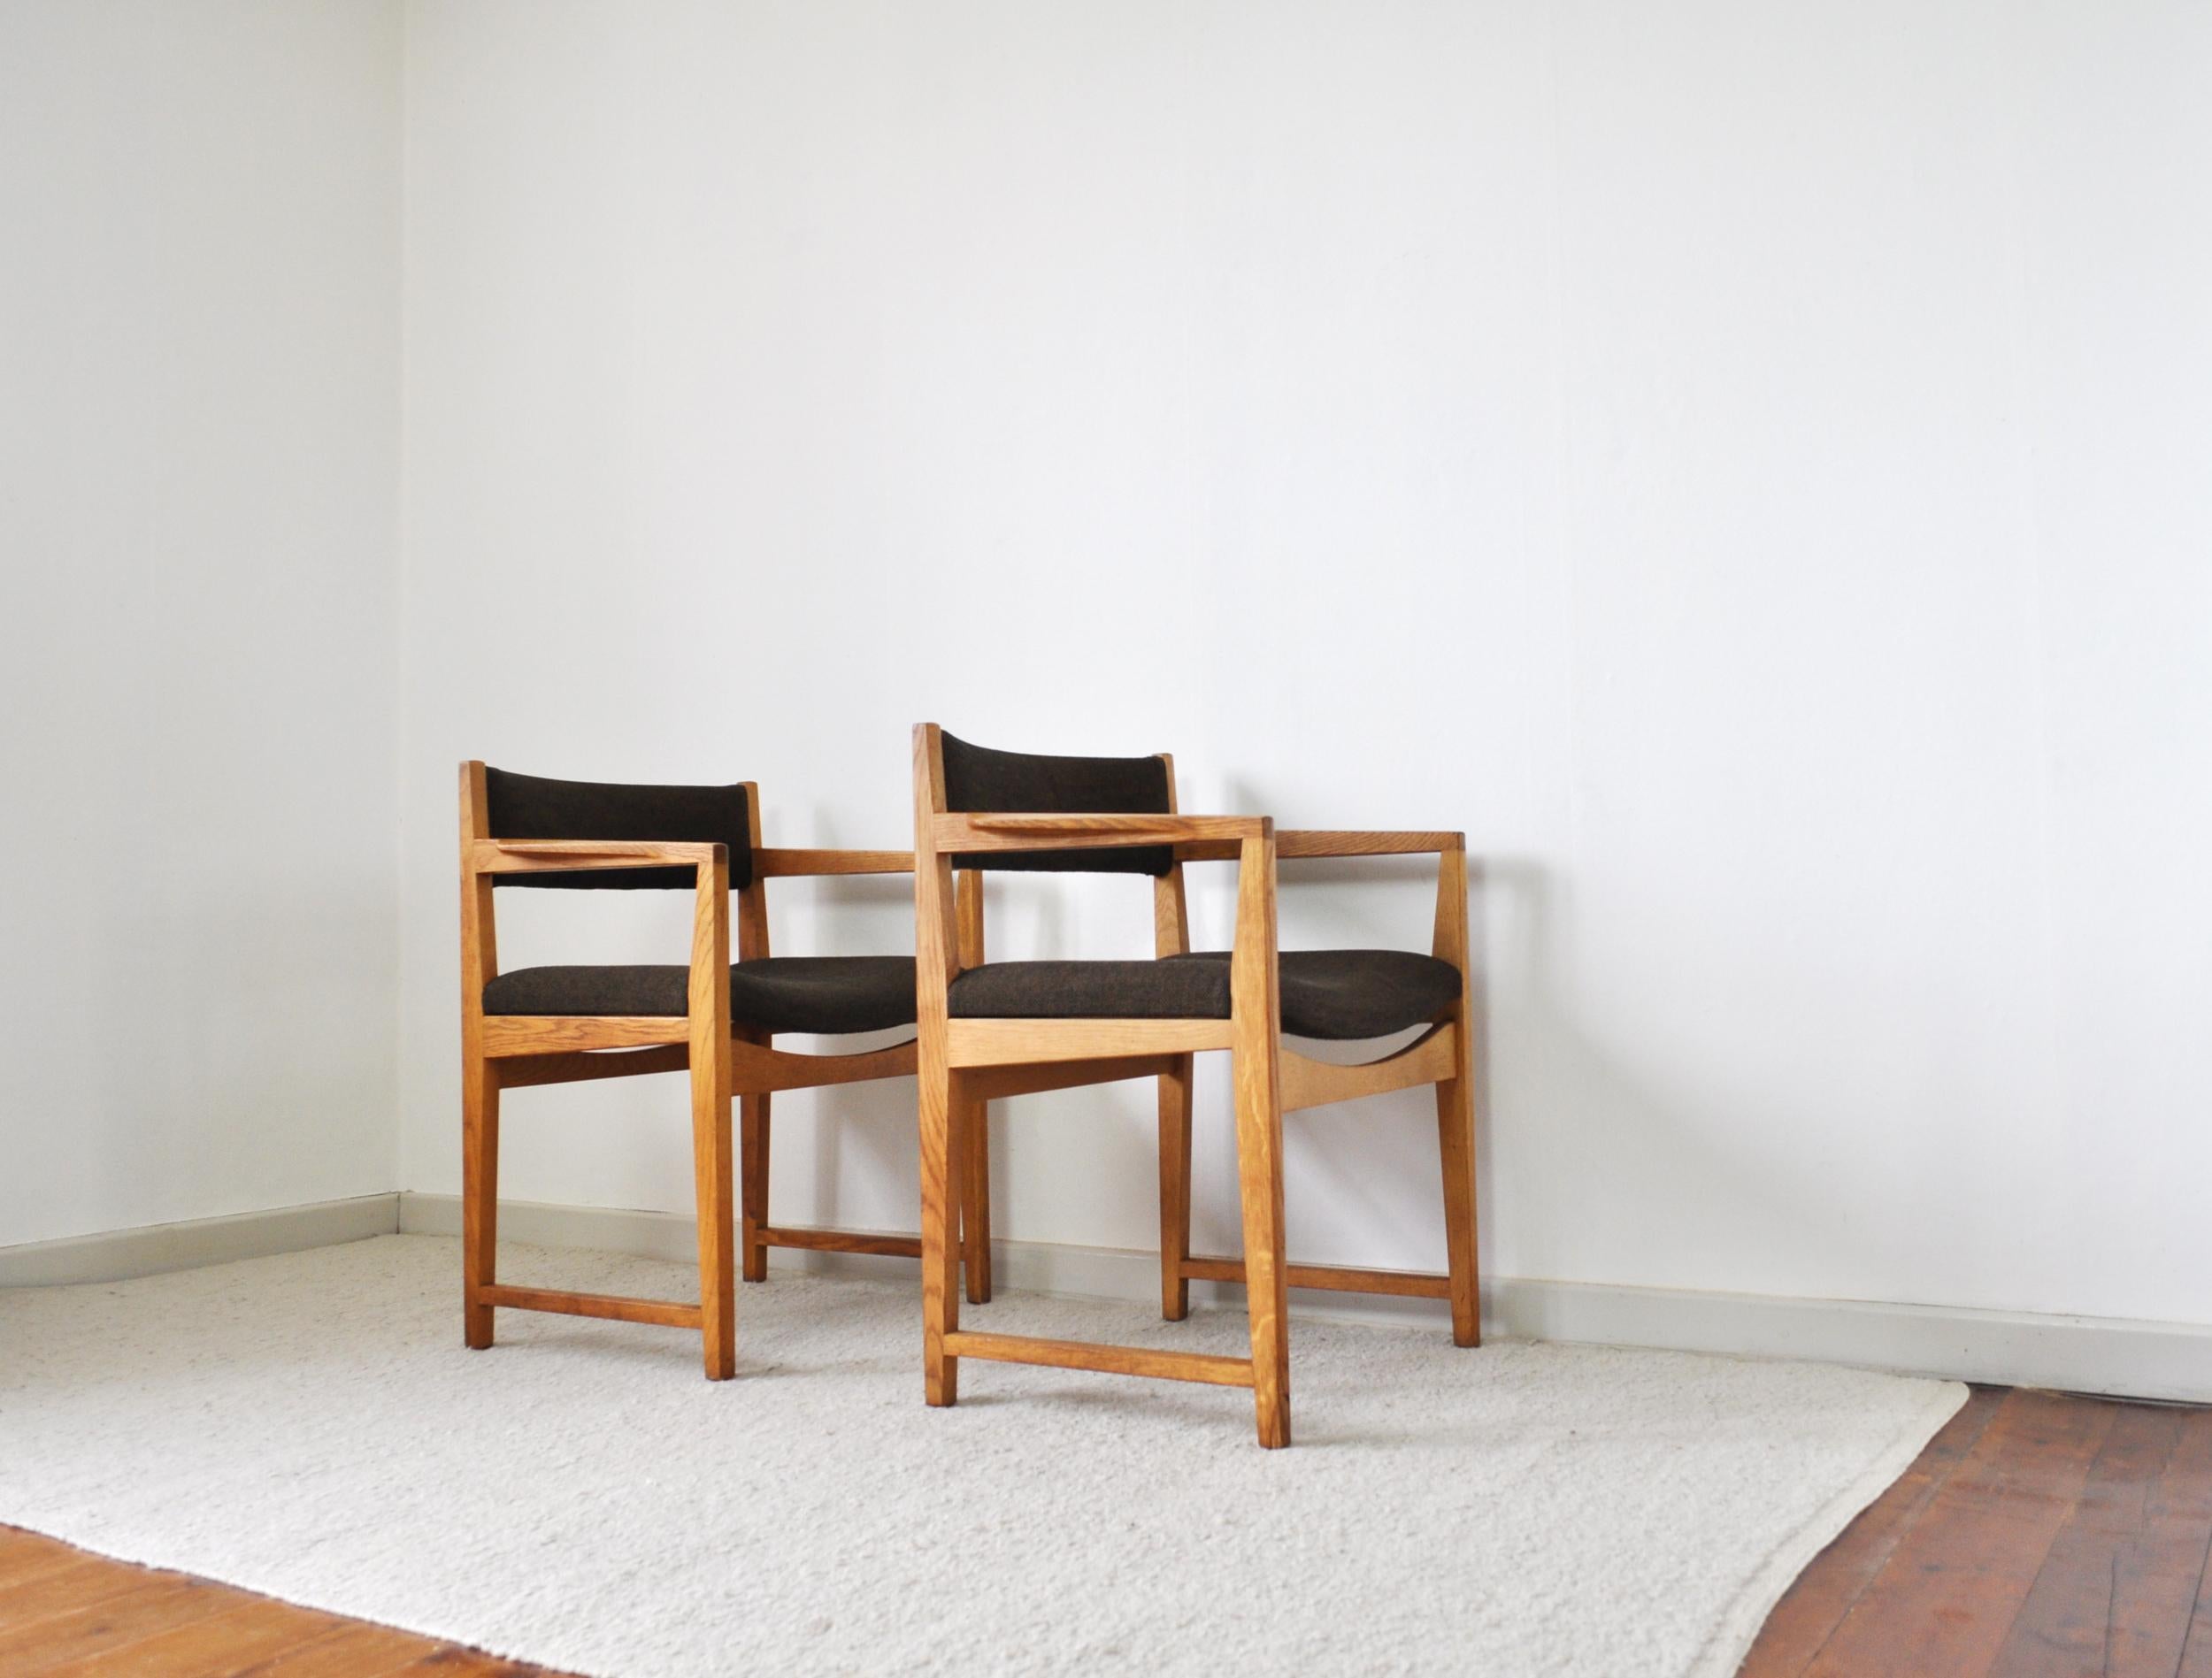 Mid-20th Century Danish Modern Armchairs by Peter Hvidt & Orla Mølgaard-Nielsen, 1950s-1960s For Sale